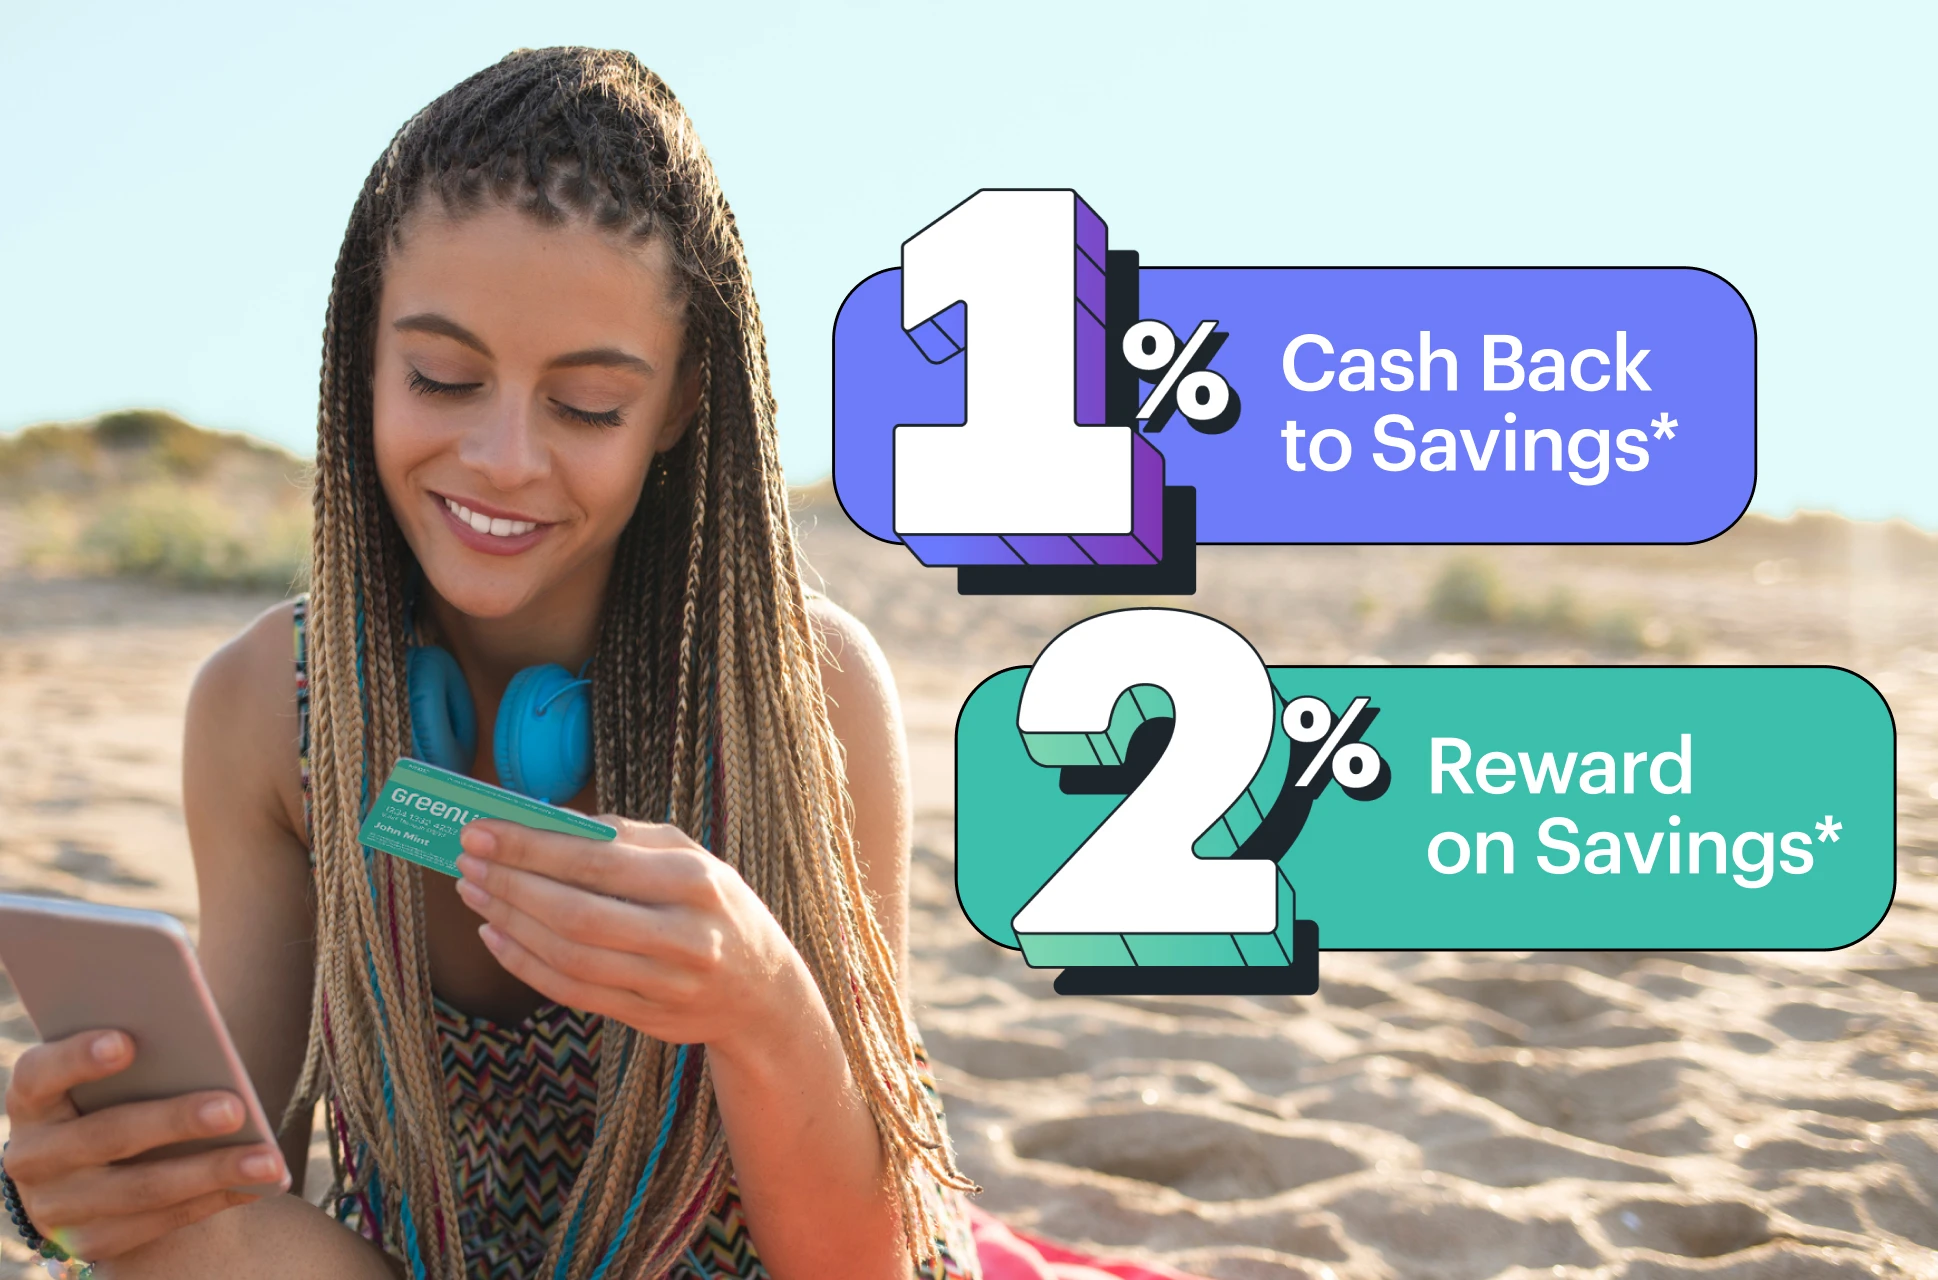 Young teen girl at the beach using Greenlight debit card and app to save money with 1% cash back to savings and 2% savings rewards